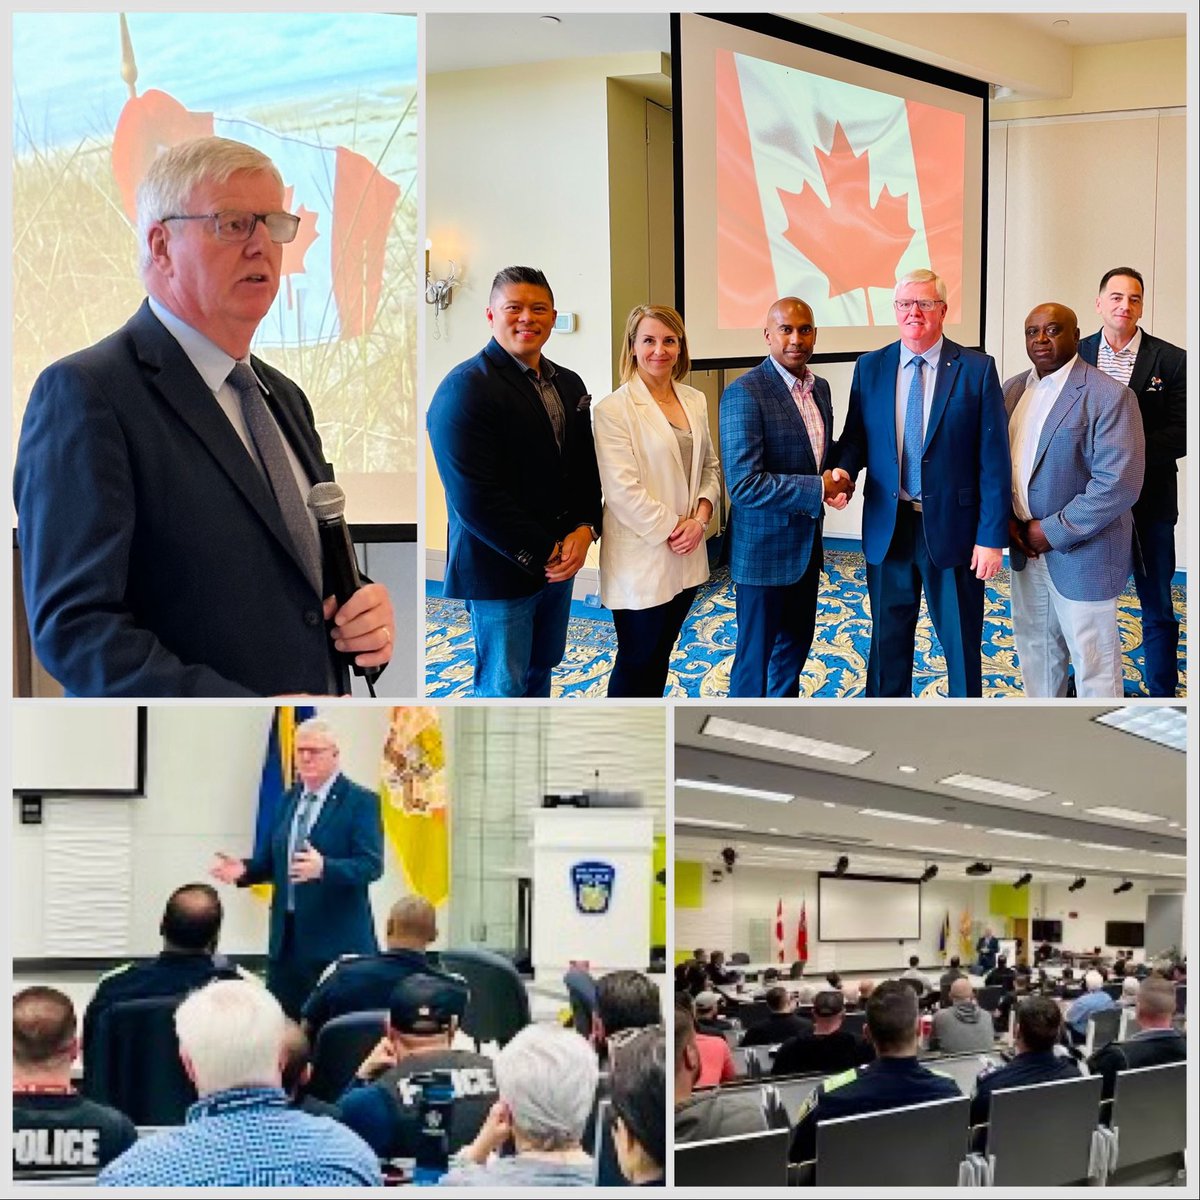 It was a pleasure to have former Chief of Defence Staff - General Rick Hillier who addressed and engaged with our @PeelPolice members and leadership team. Thank you for sharing your amazing experiences, stories and what it means to be a strong leader.